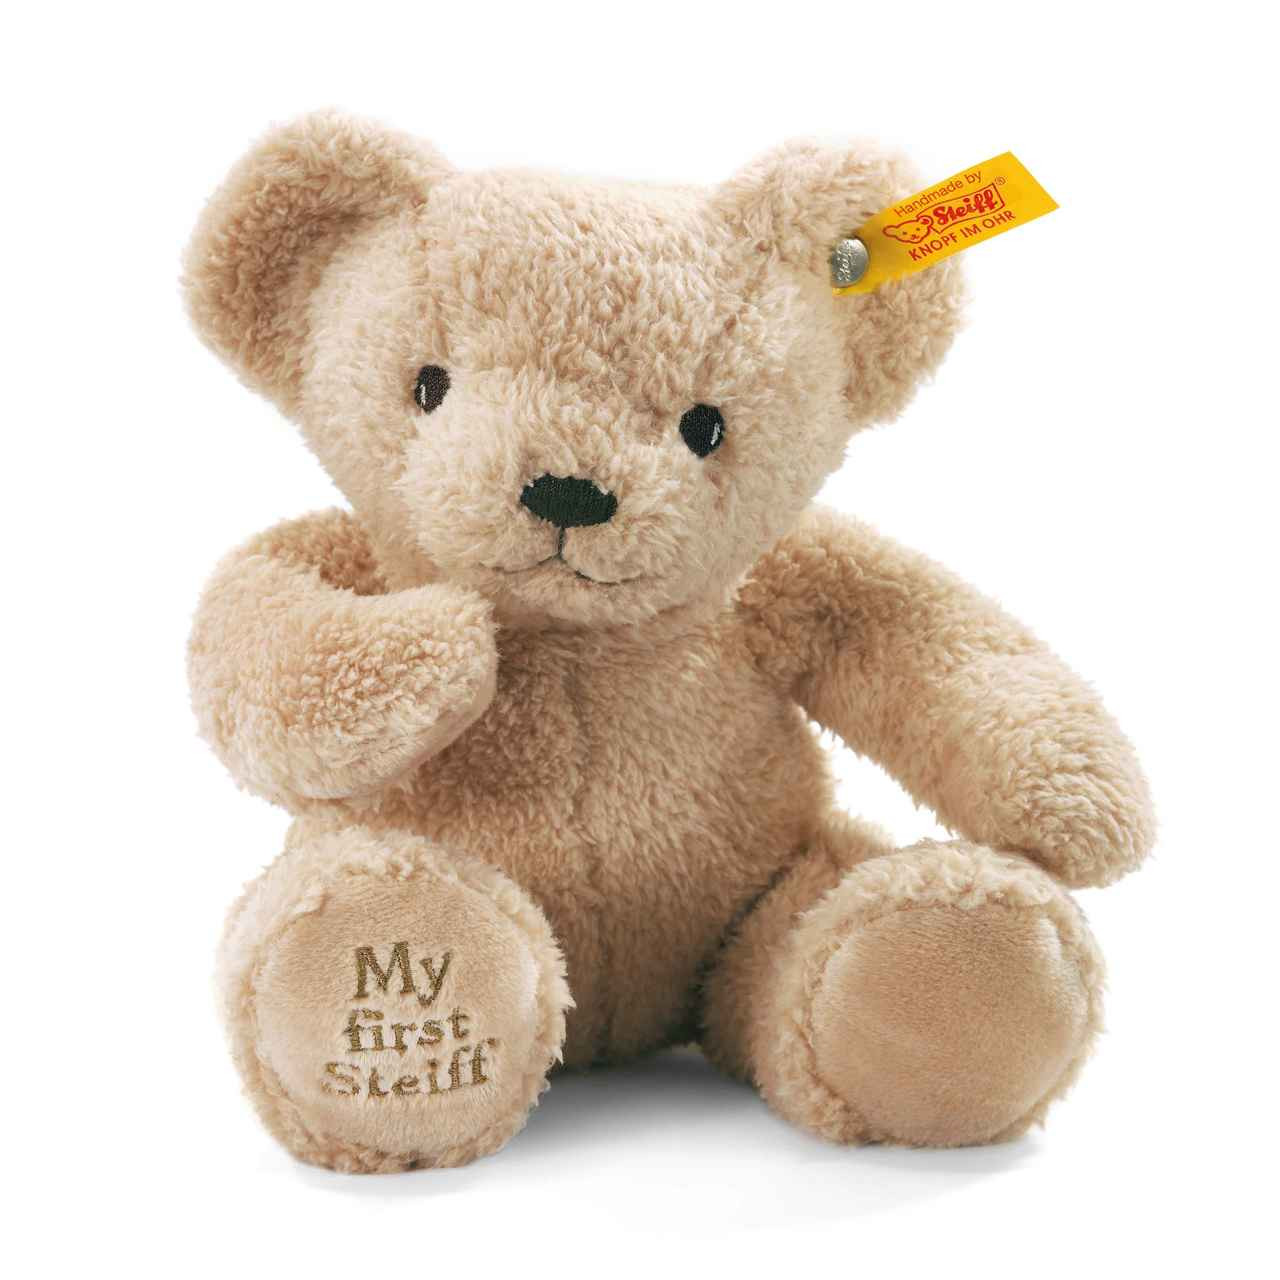 My First Steiff Teddy Bear - Gifts for Baby